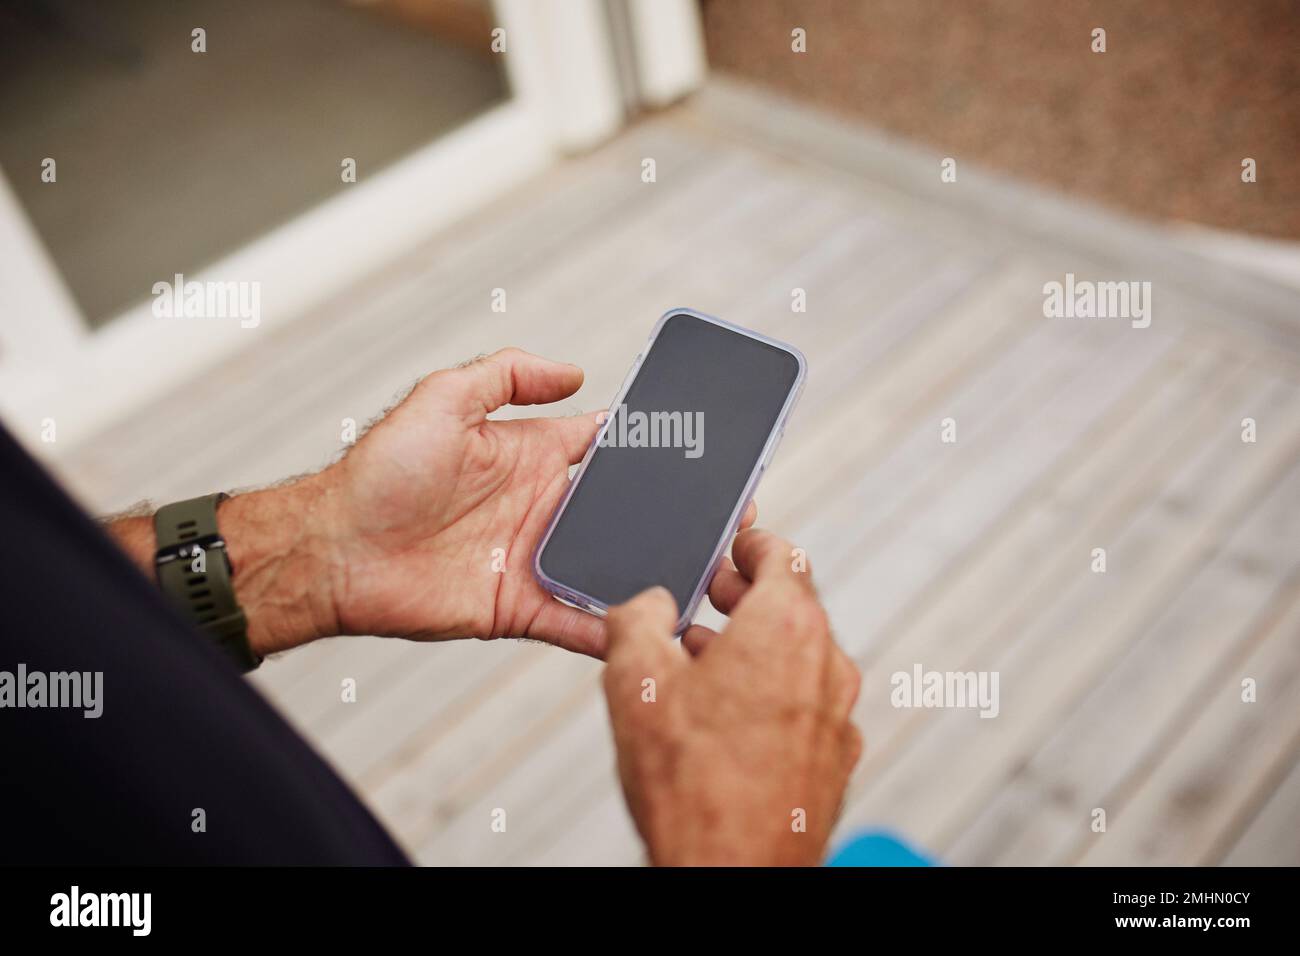 Hands holding cell phone Stock Photo